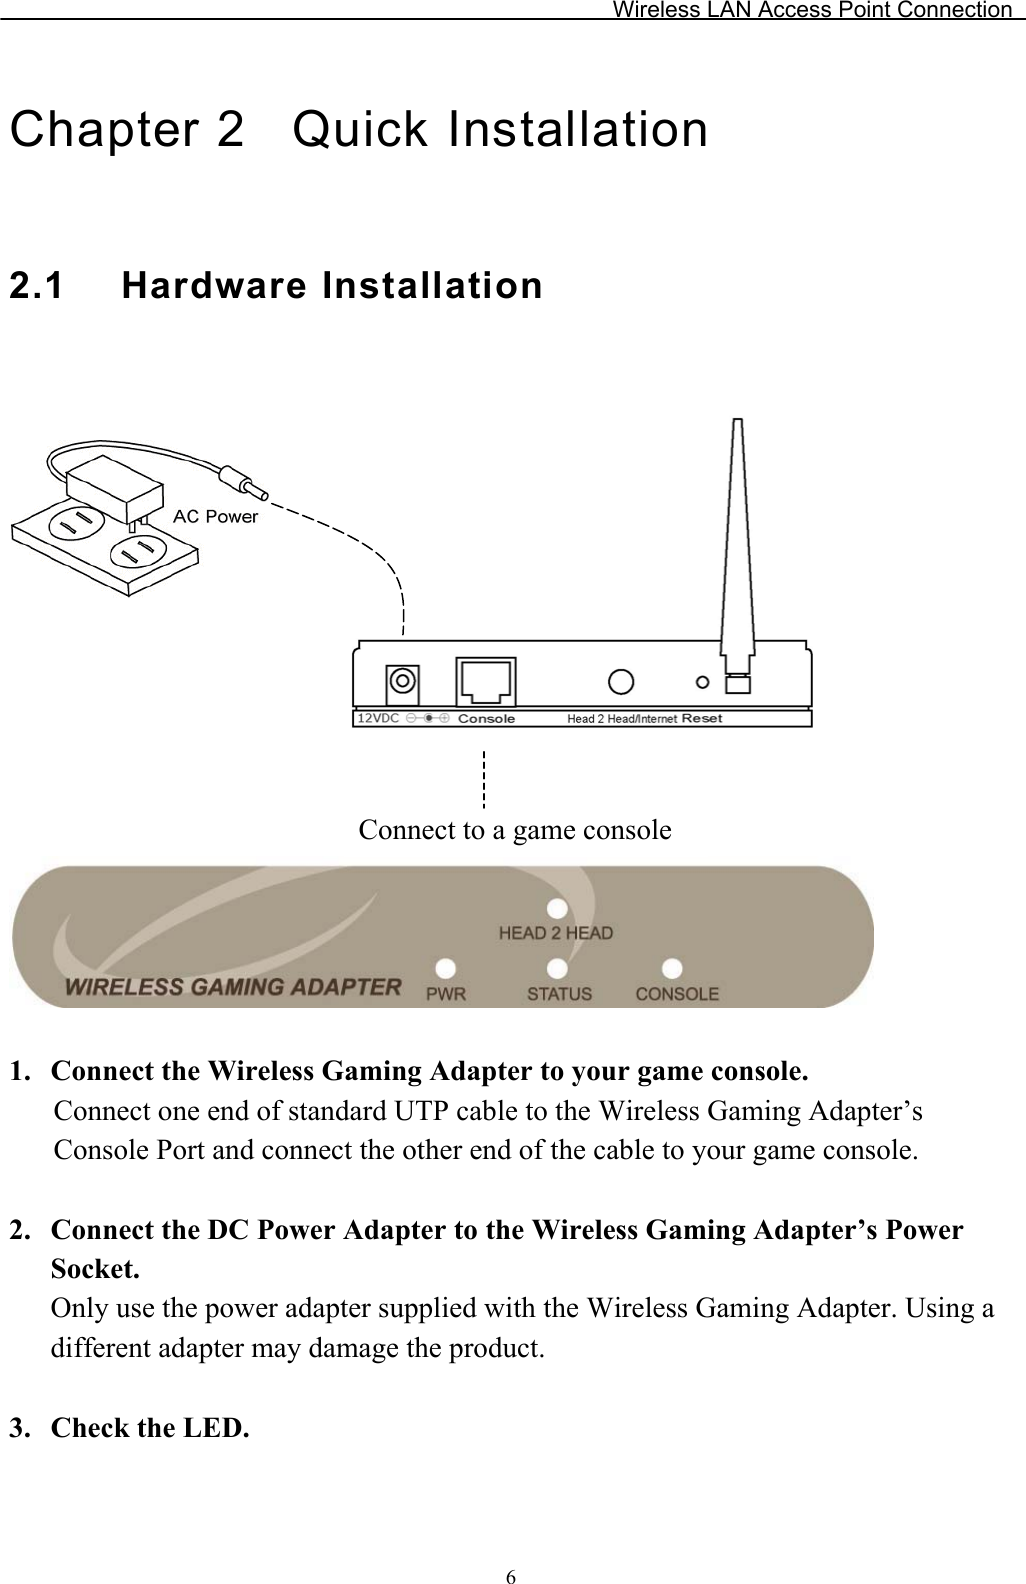 Wireless LAN Access Point Connection Chapter 2  Quick Installation 2.1 Hardware InstallationConnect to a game console 1.2.3.Connect the Wireless Gaming Adapter to your game console. Connect one end of standard UTP cable to the Wireless Gaming Adapter’s Console Port and connect the other end of the cable to your game console.Connect the DC Power Adapter to the Wireless Gaming Adapter’s PowerSocket.Only use the power adapter supplied with the Wireless Gaming Adapter. Using a different adapter may damage the product. Check the LED. 6